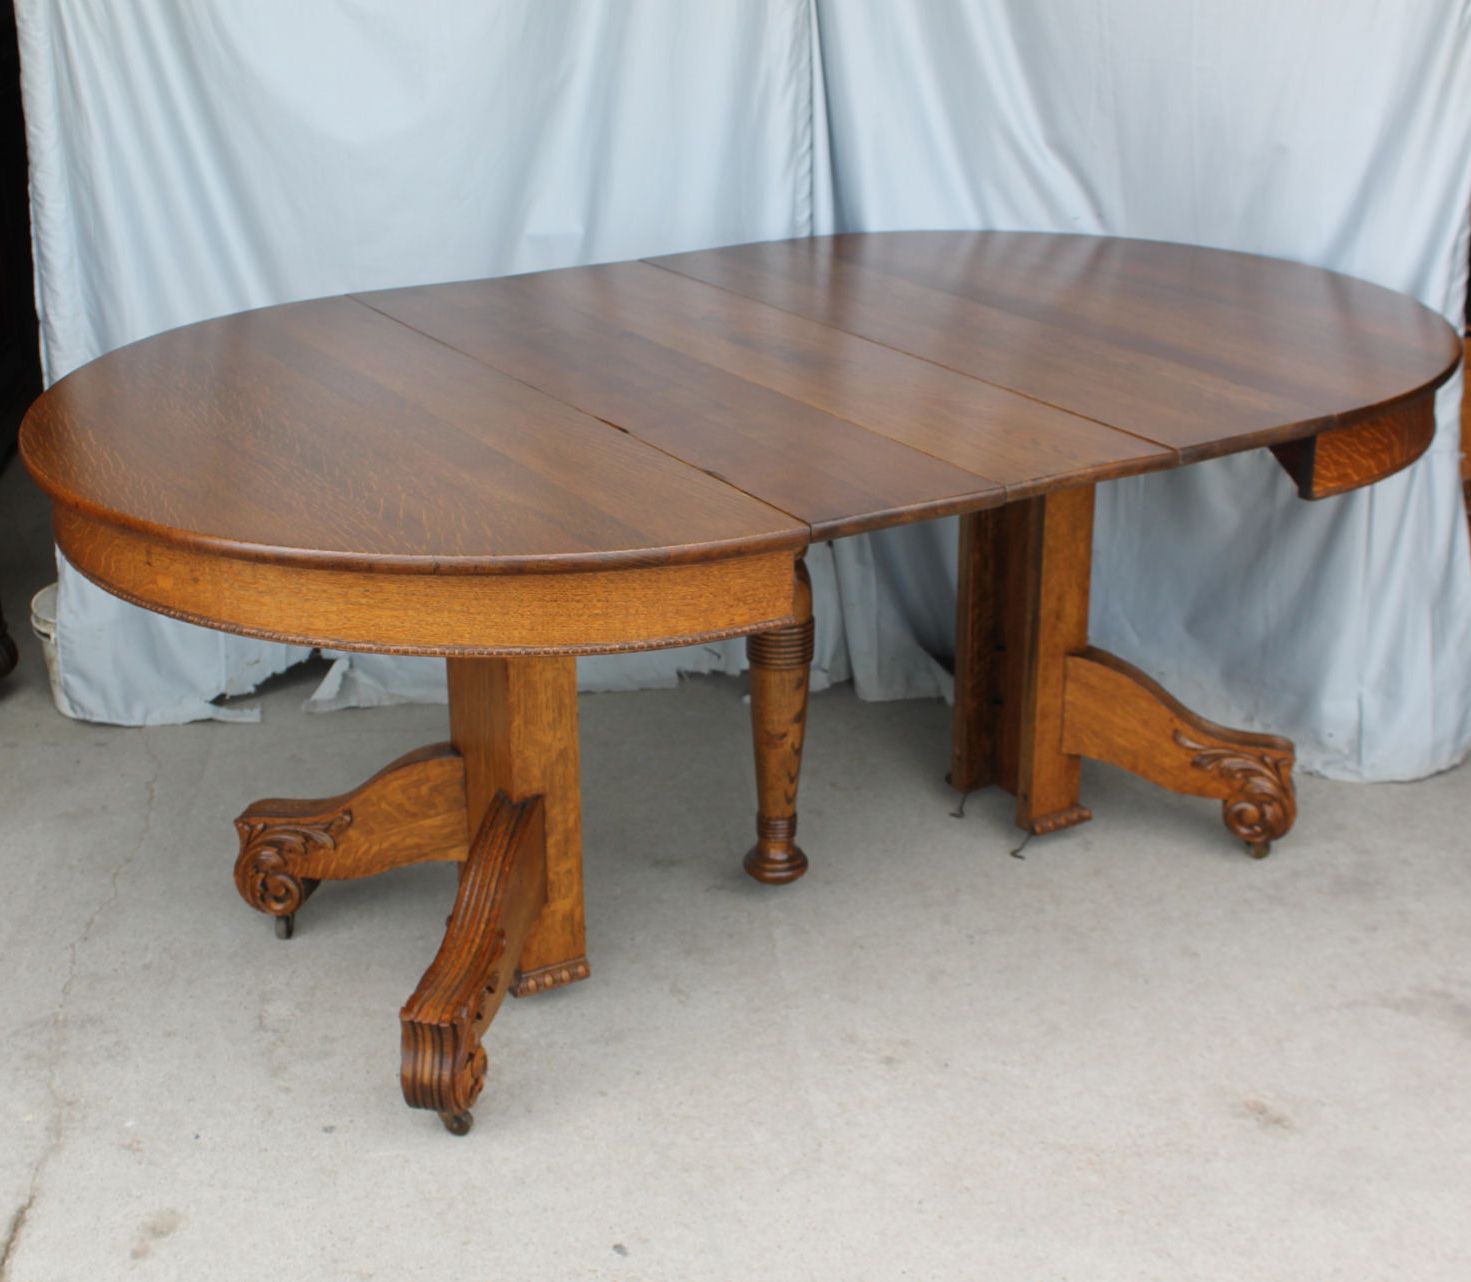 2019 Vintage Brown Round Dining Tables In Bargain John's Antiques » Blog Archive Antique Round Oak (View 12 of 20)